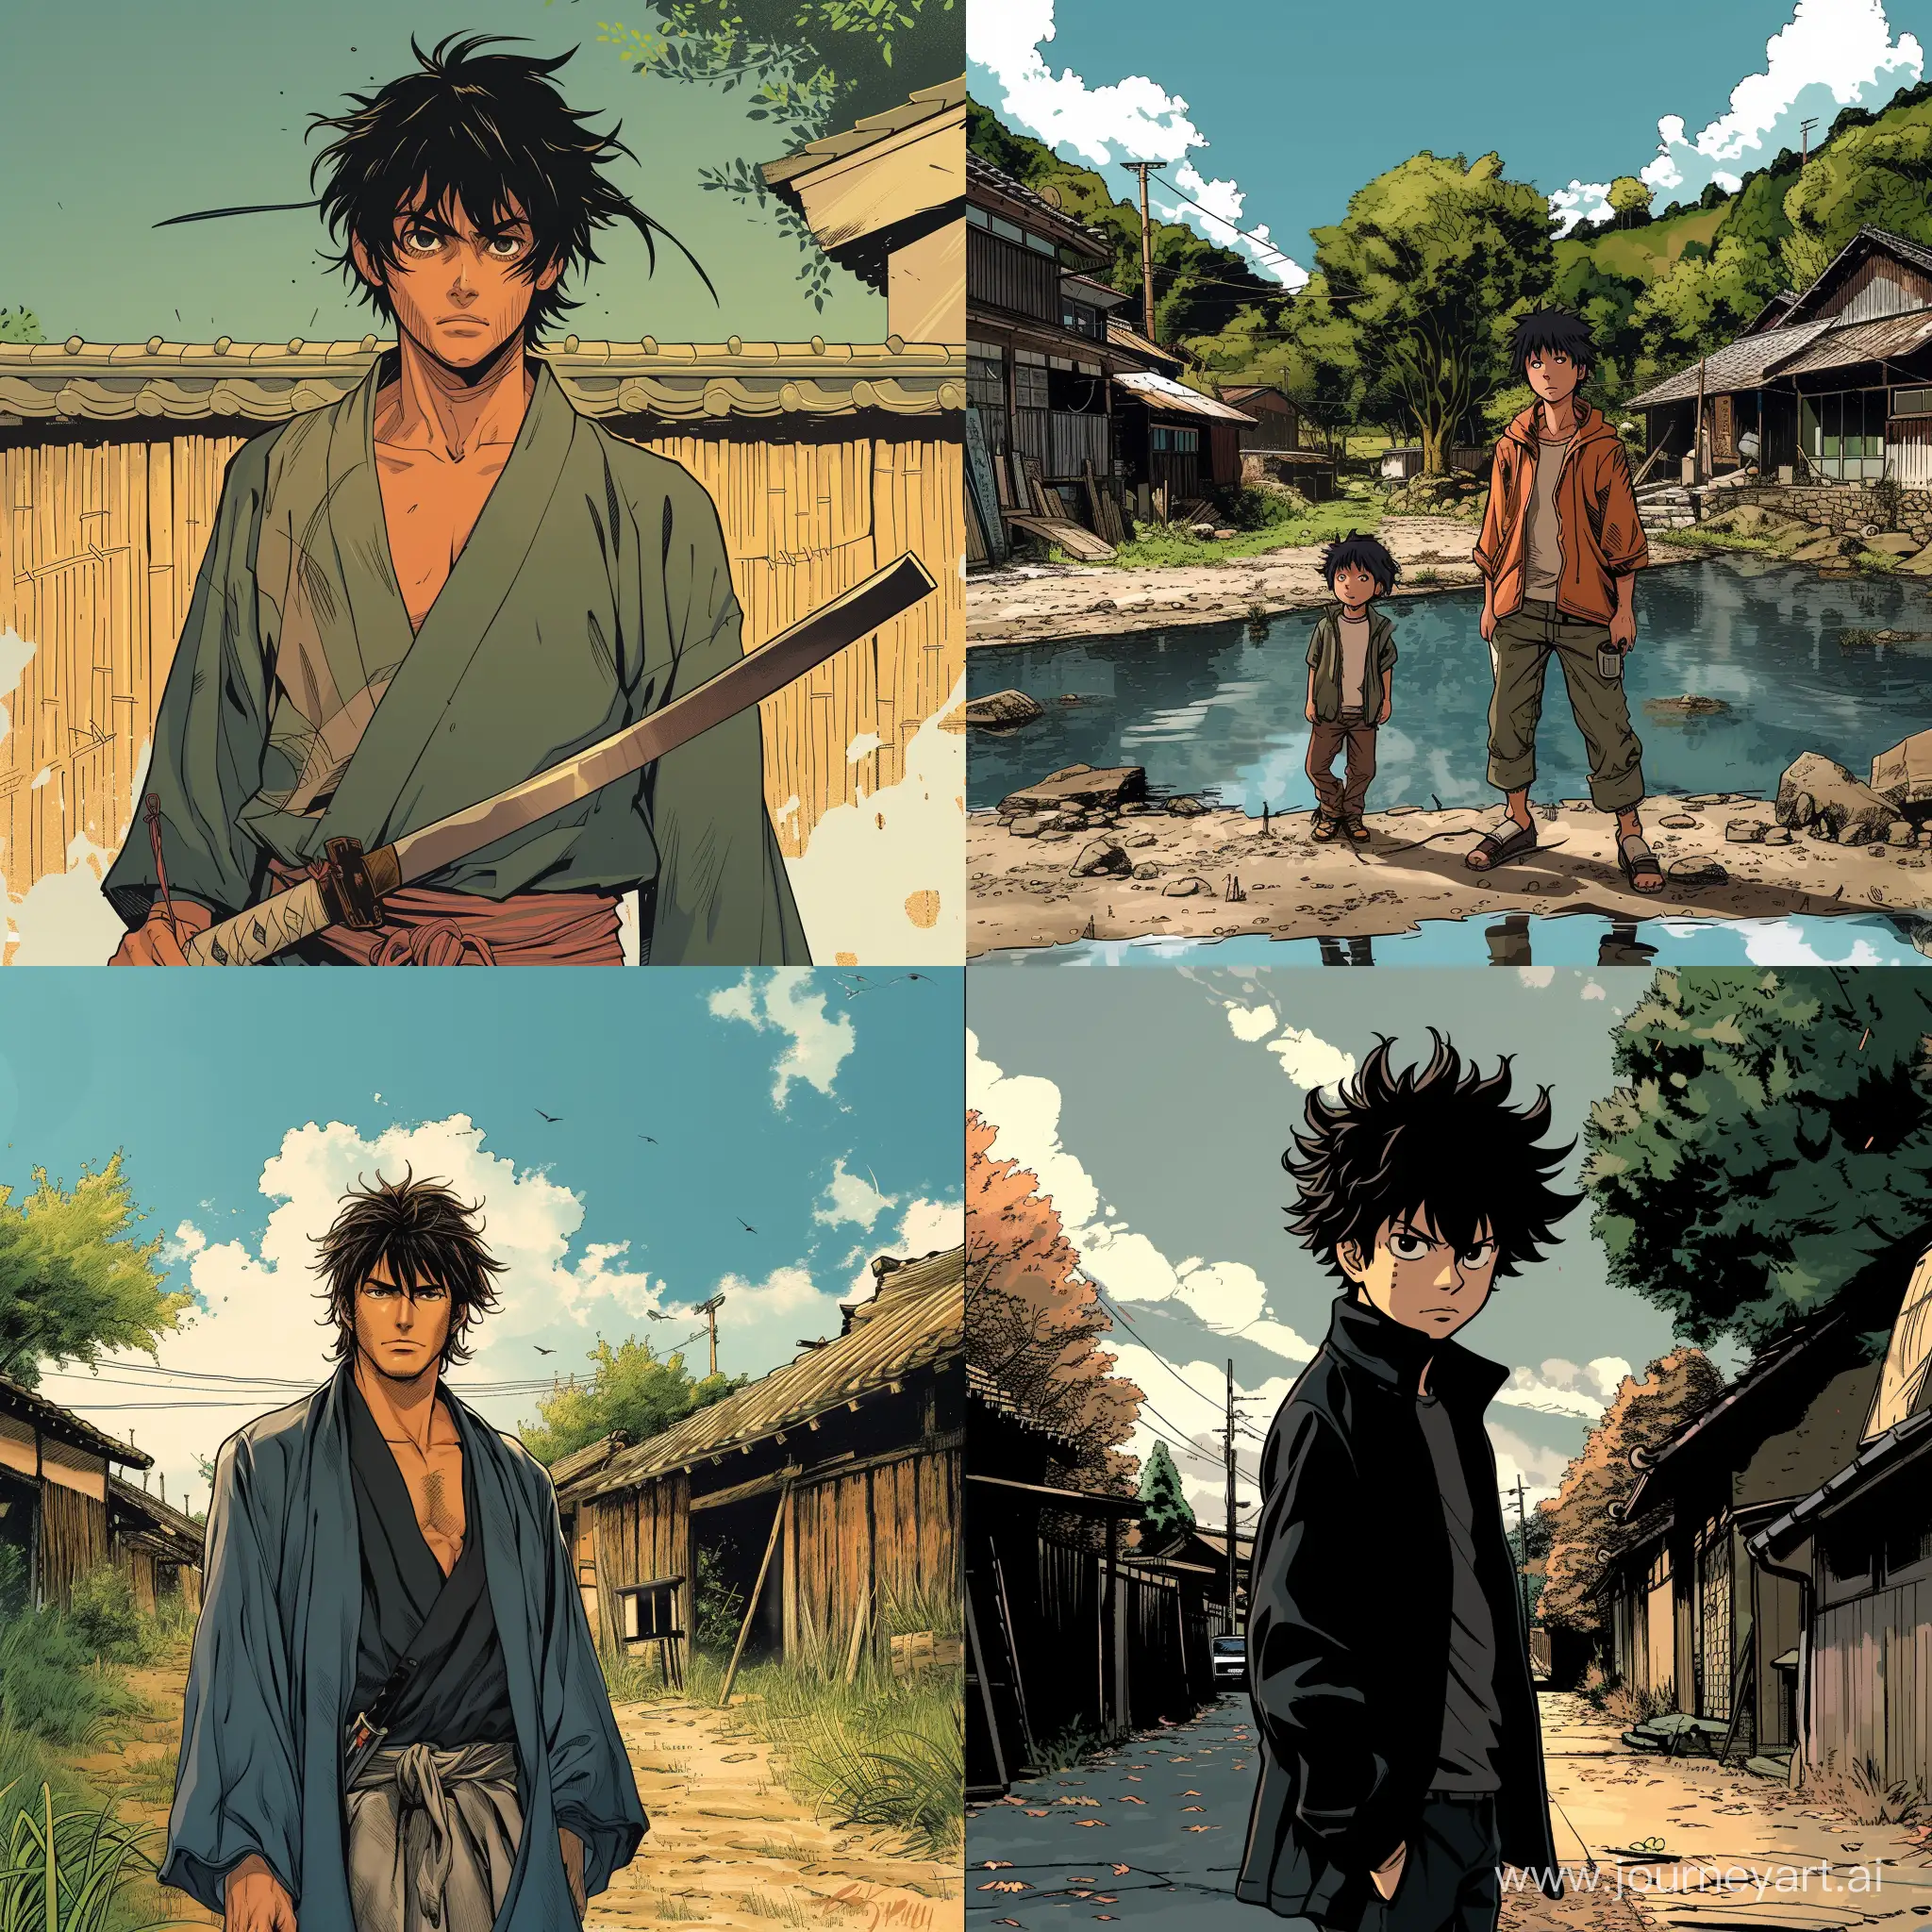 Determined-Hiro-Seeking-Strength-to-Protect-Village-Colorful-Manhwa-Style